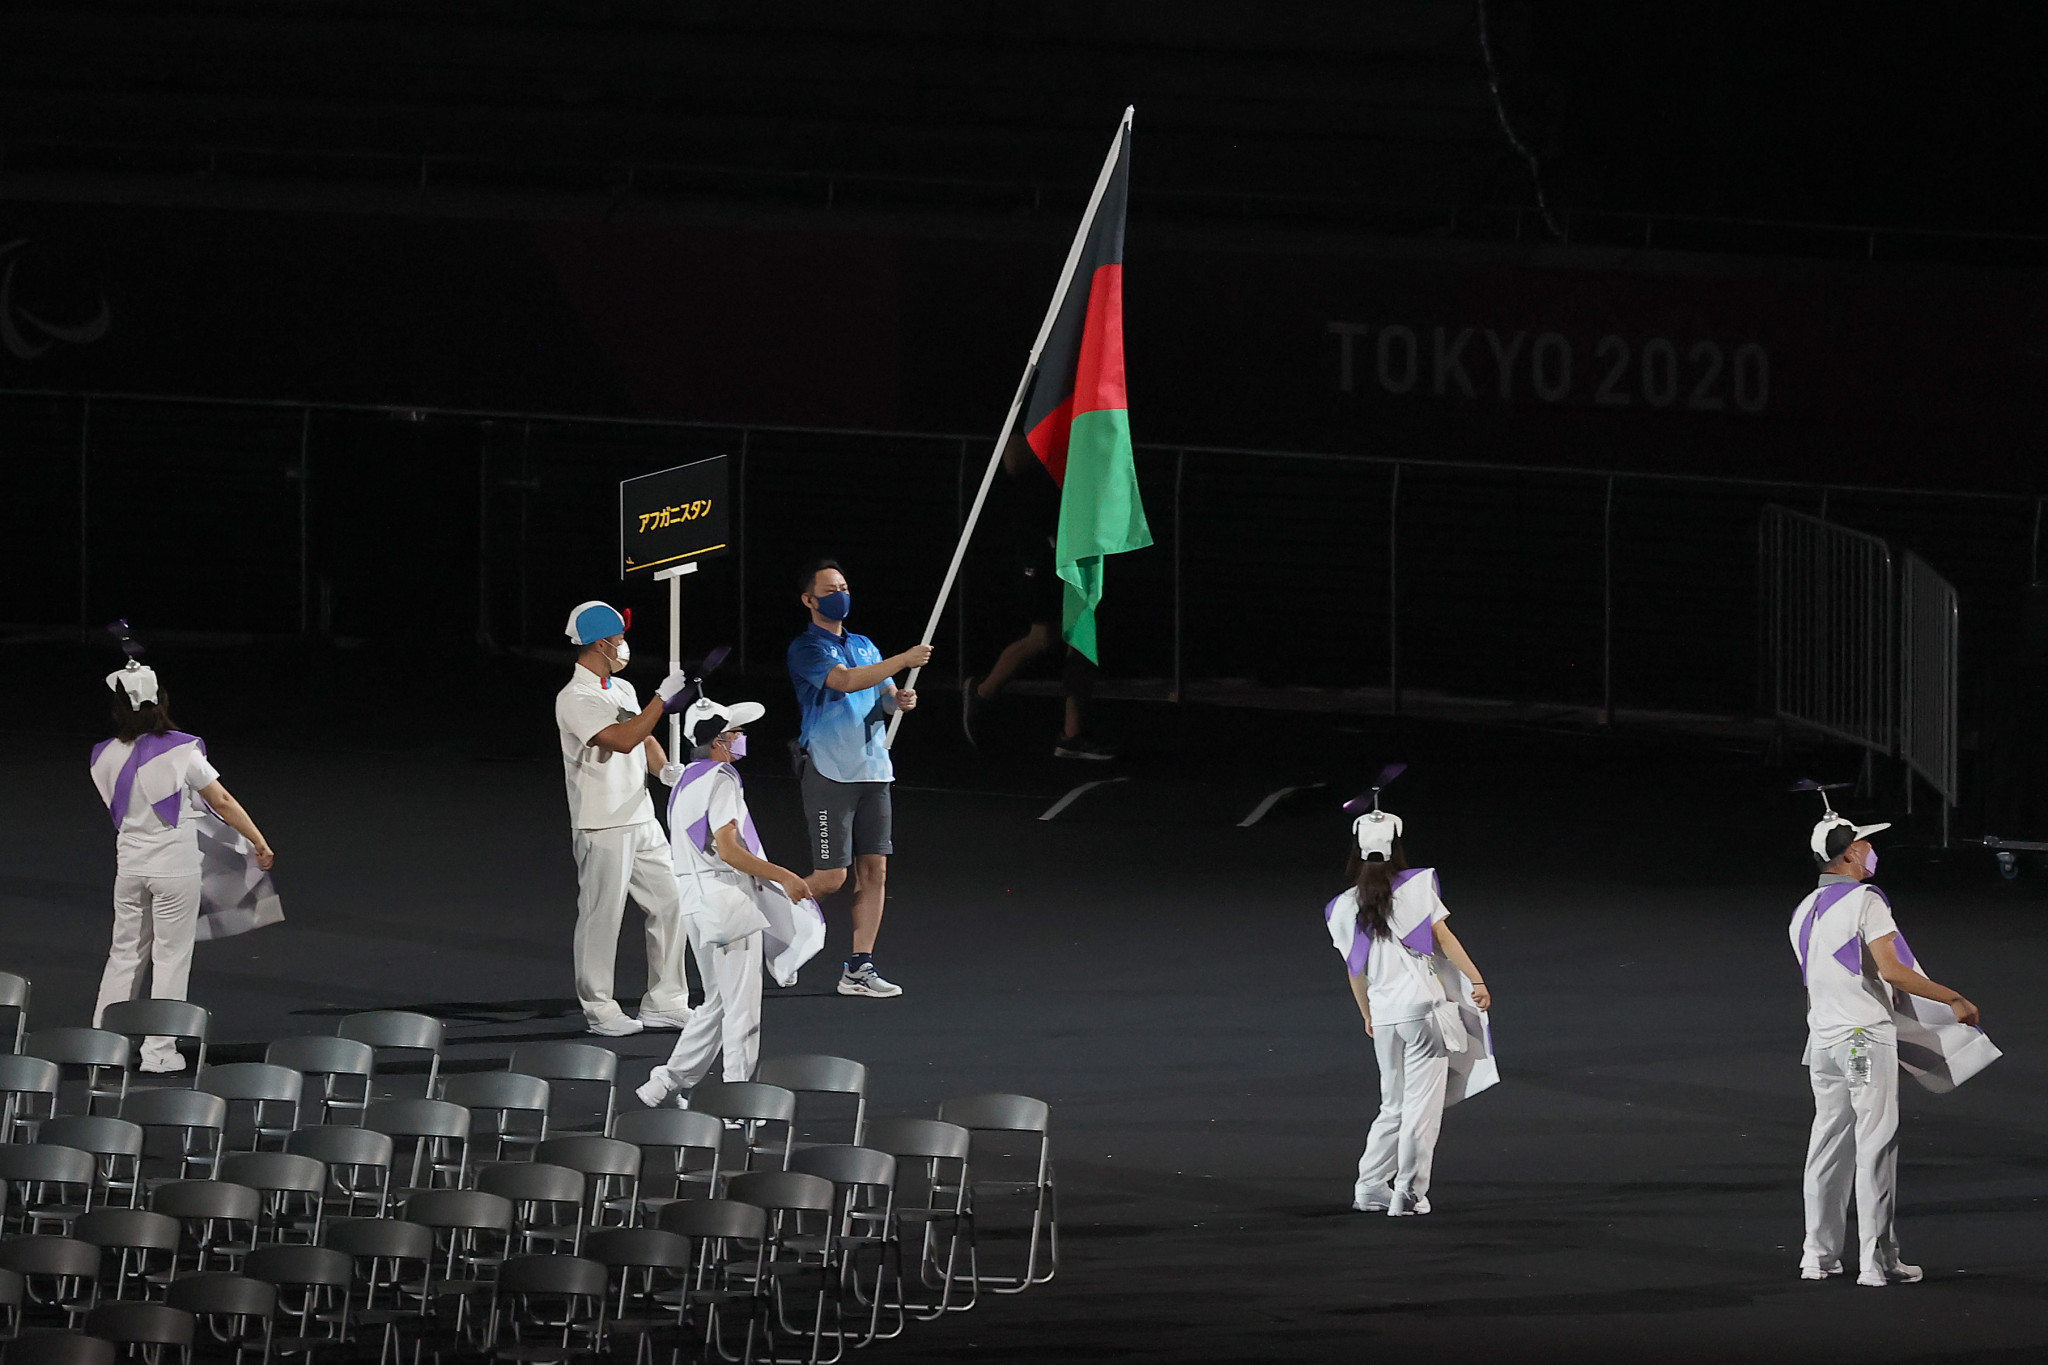 Afghanistan's flag being shown at the Opening Ceremony was both symbolic and also a sign of the IPC's hope the athletes could compete ©Getty Images